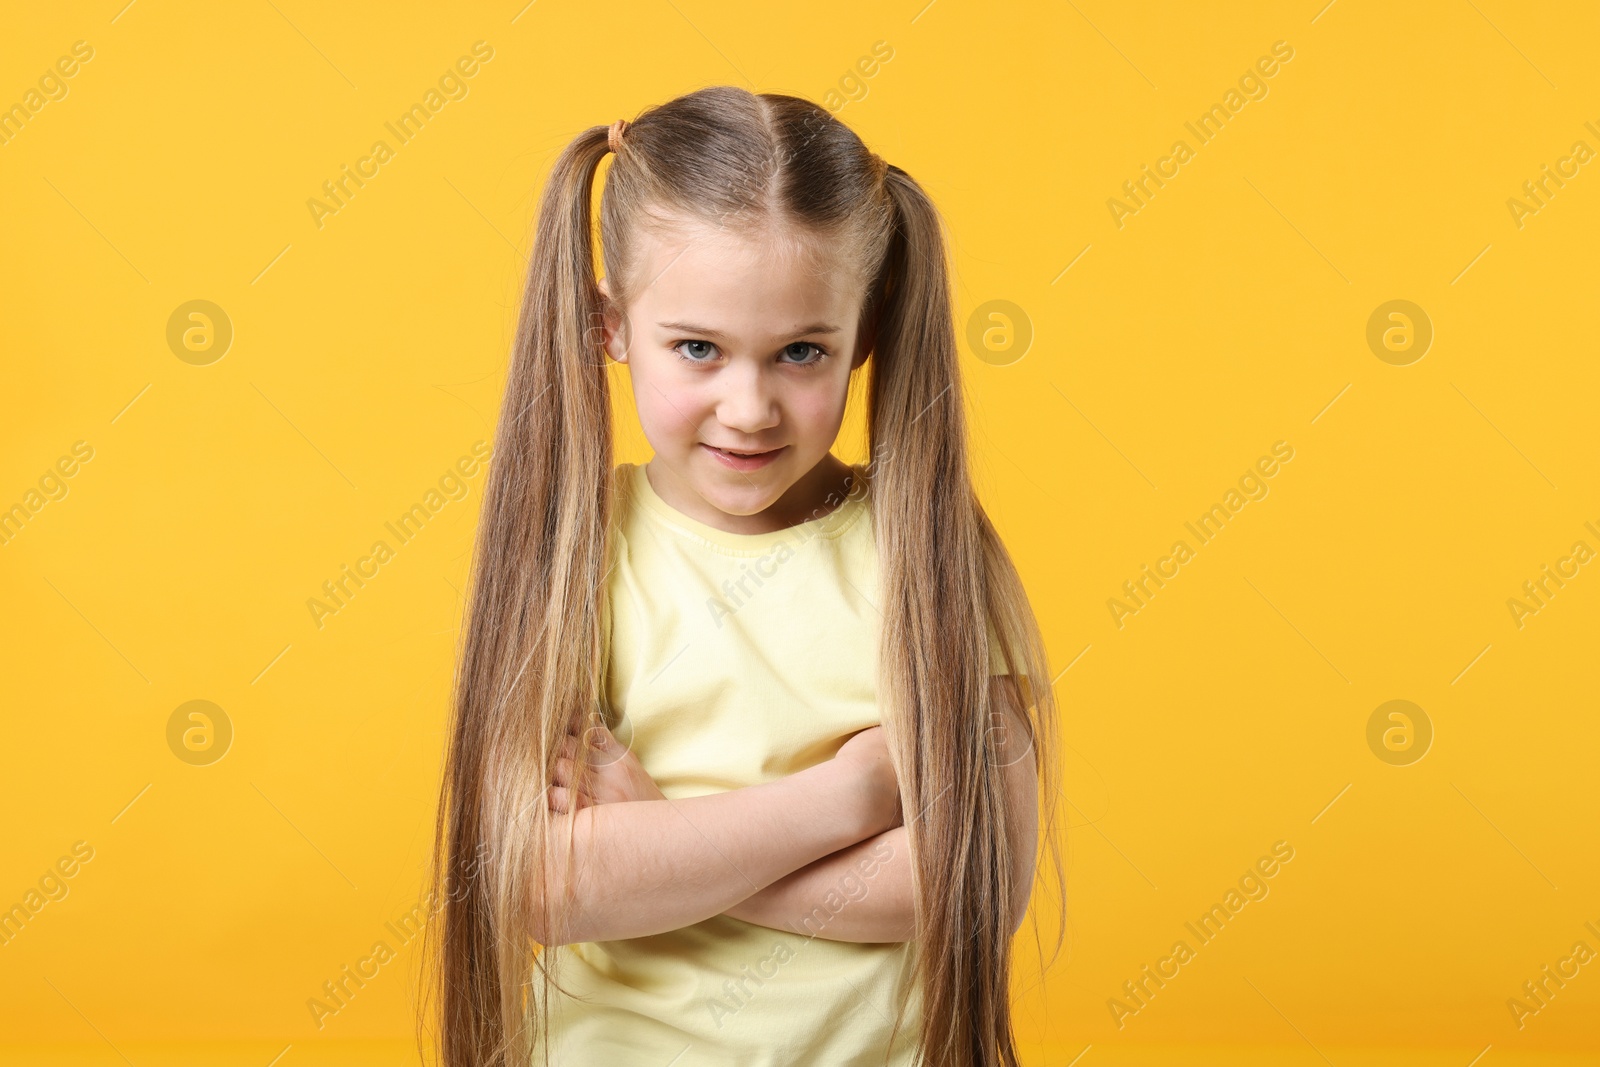 Photo of Portrait of cute little girl with crossed arms on orange background